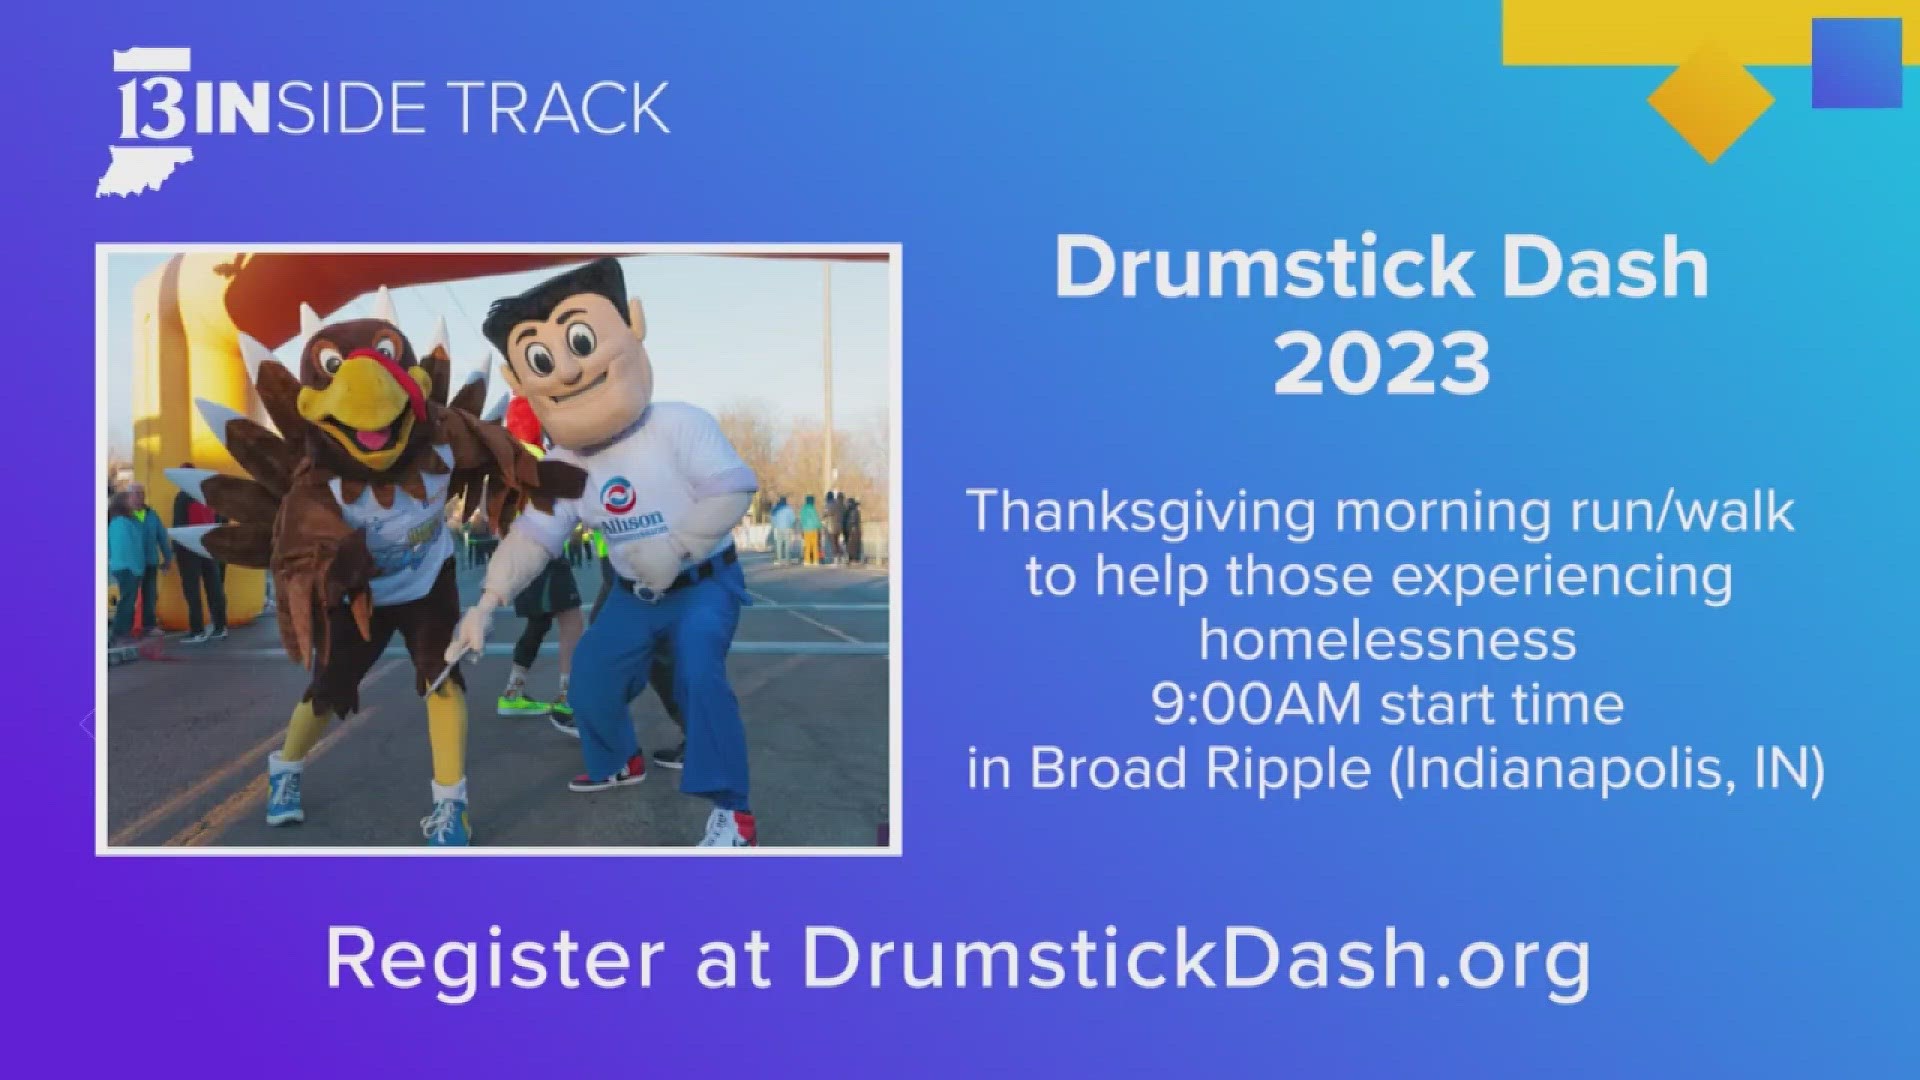 Wheeler Mission's 21st annual Drumstick Dash presented by Huntington Bank is on Thanksgiving morning. The event begins at 9am in Broad Ripple.